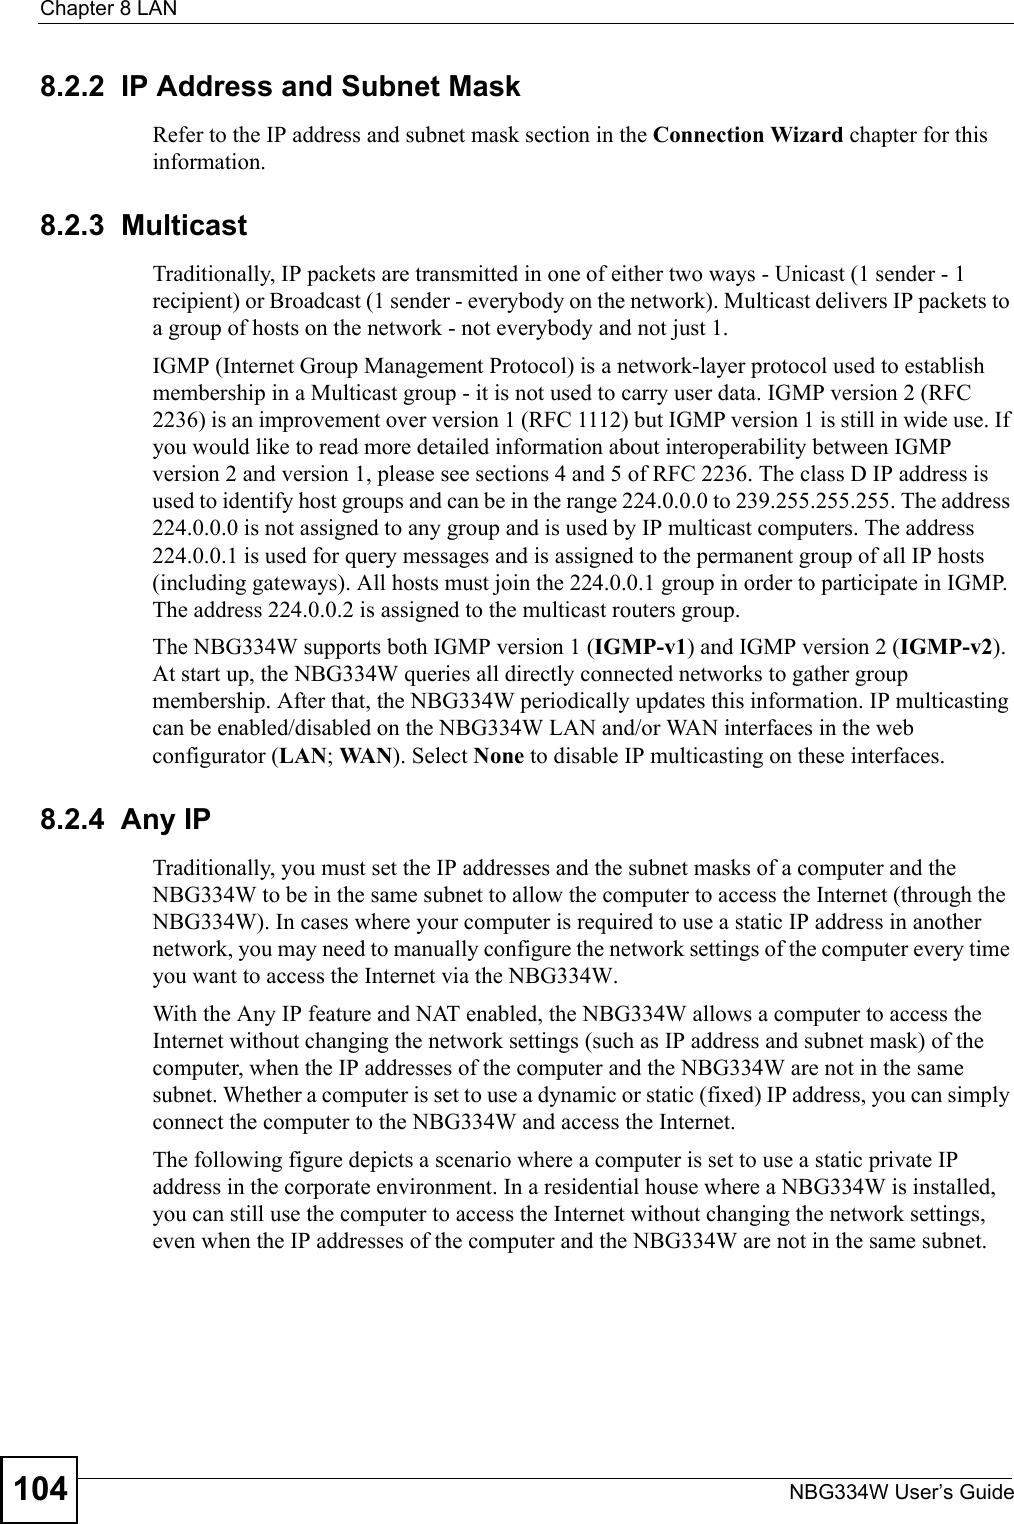 Chapter 8 LANNBG334W User’s Guide1048.2.2  IP Address and Subnet MaskRefer to the IP address and subnet mask section in the Connection Wizard chapter for this information.8.2.3  MulticastTraditionally, IP packets are transmitted in one of either two ways - Unicast (1 sender - 1 recipient) or Broadcast (1 sender - everybody on the network). Multicast delivers IP packets to a group of hosts on the network - not everybody and not just 1. IGMP (Internet Group Management Protocol) is a network-layer protocol used to establish membership in a Multicast group - it is not used to carry user data. IGMP version 2 (RFC 2236) is an improvement over version 1 (RFC 1112) but IGMP version 1 is still in wide use. If you would like to read more detailed information about interoperability between IGMP version 2 and version 1, please see sections 4 and 5 of RFC 2236. The class D IP address is used to identify host groups and can be in the range 224.0.0.0 to 239.255.255.255. The address 224.0.0.0 is not assigned to any group and is used by IP multicast computers. The address 224.0.0.1 is used for query messages and is assigned to the permanent group of all IP hosts (including gateways). All hosts must join the 224.0.0.1 group in order to participate in IGMP. The address 224.0.0.2 is assigned to the multicast routers group. The NBG334W supports both IGMP version 1 (IGMP-v1) and IGMP version 2 (IGMP-v2). At start up, the NBG334W queries all directly connected networks to gather group membership. After that, the NBG334W periodically updates this information. IP multicasting can be enabled/disabled on the NBG334W LAN and/or WAN interfaces in the web configurator (LAN; WA N ). Select None to disable IP multicasting on these interfaces.8.2.4  Any IPTraditionally, you must set the IP addresses and the subnet masks of a computer and the NBG334W to be in the same subnet to allow the computer to access the Internet (through the NBG334W). In cases where your computer is required to use a static IP address in another network, you may need to manually configure the network settings of the computer every time you want to access the Internet via the NBG334W.With the Any IP feature and NAT enabled, the NBG334W allows a computer to access the Internet without changing the network settings (such as IP address and subnet mask) of the computer, when the IP addresses of the computer and the NBG334W are not in the same subnet. Whether a computer is set to use a dynamic or static (fixed) IP address, you can simply connect the computer to the NBG334W and access the Internet.The following figure depicts a scenario where a computer is set to use a static private IP address in the corporate environment. In a residential house where a NBG334W is installed, you can still use the computer to access the Internet without changing the network settings, even when the IP addresses of the computer and the NBG334W are not in the same subnet. 